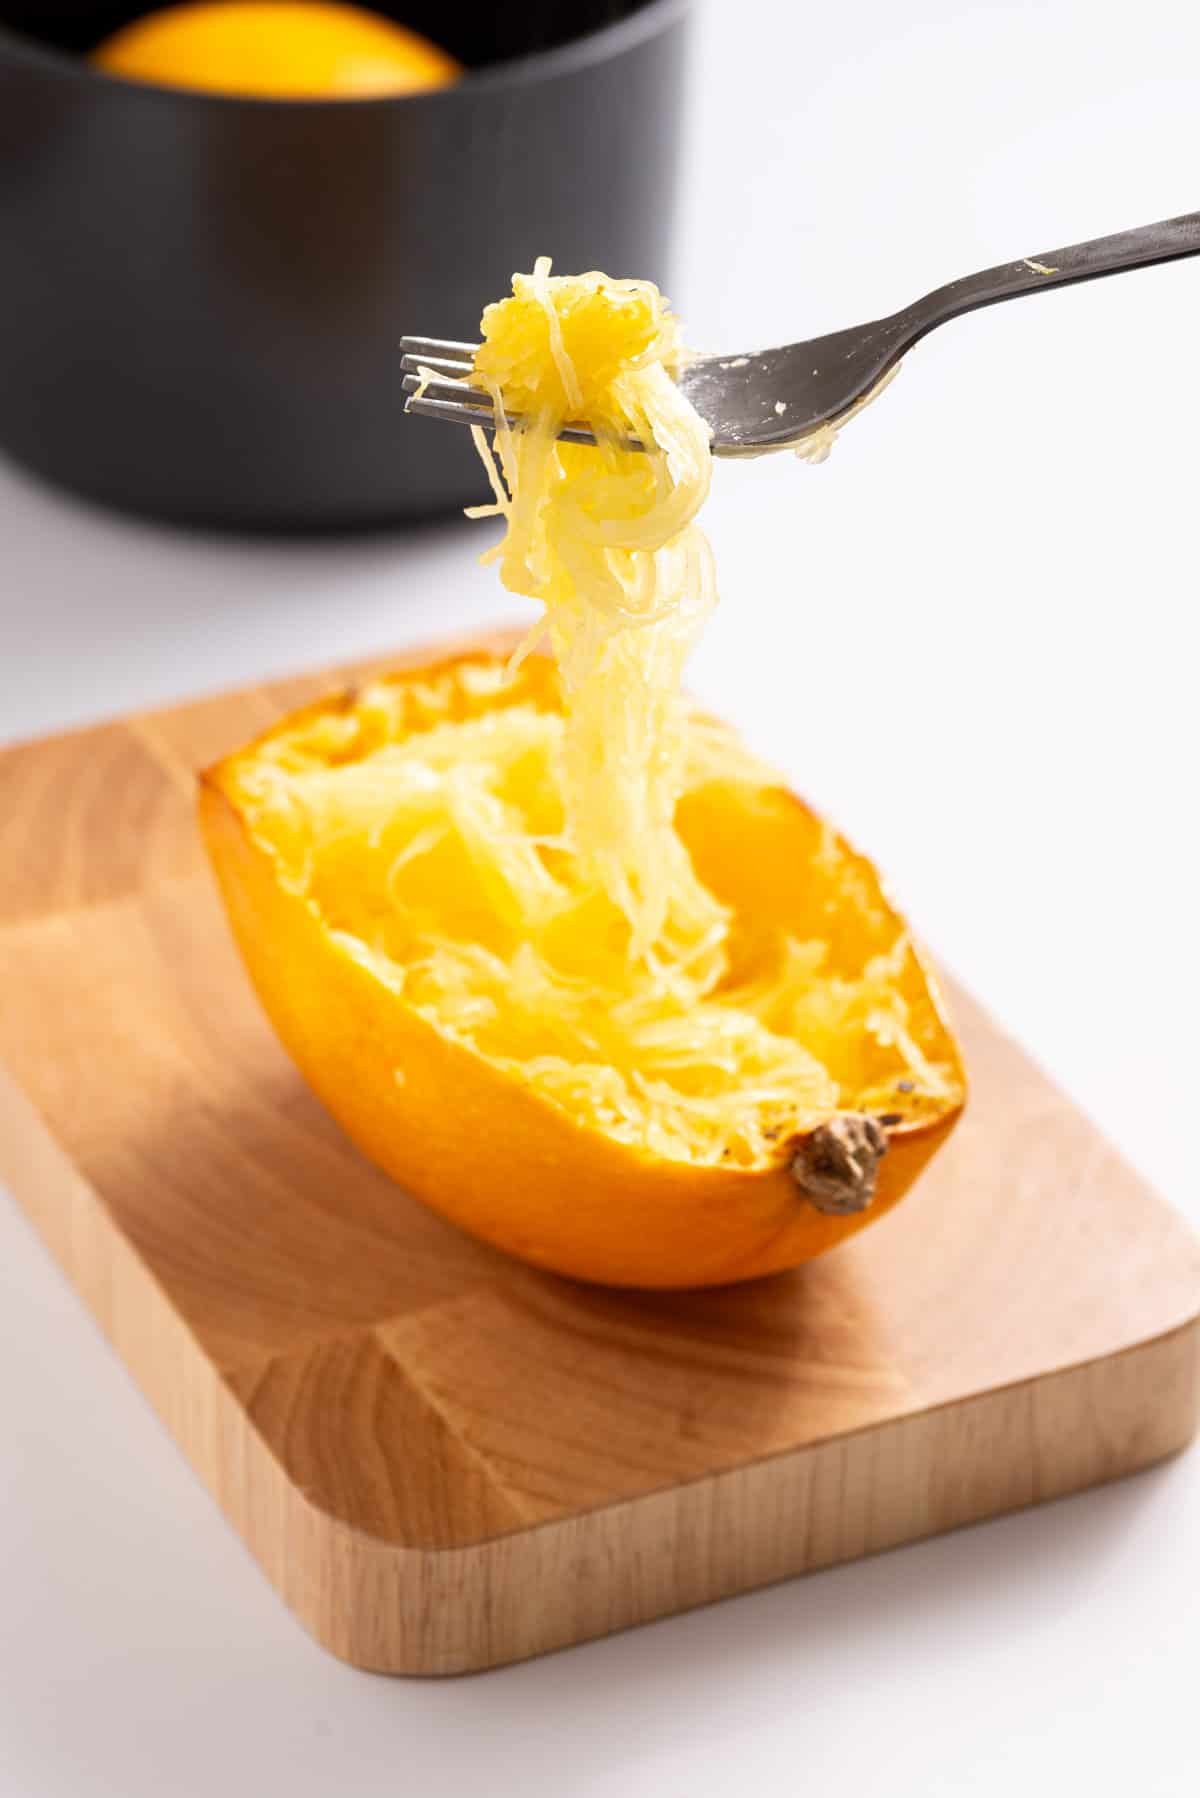 An image of a fork raising up a few strands from the spaghetti squash.